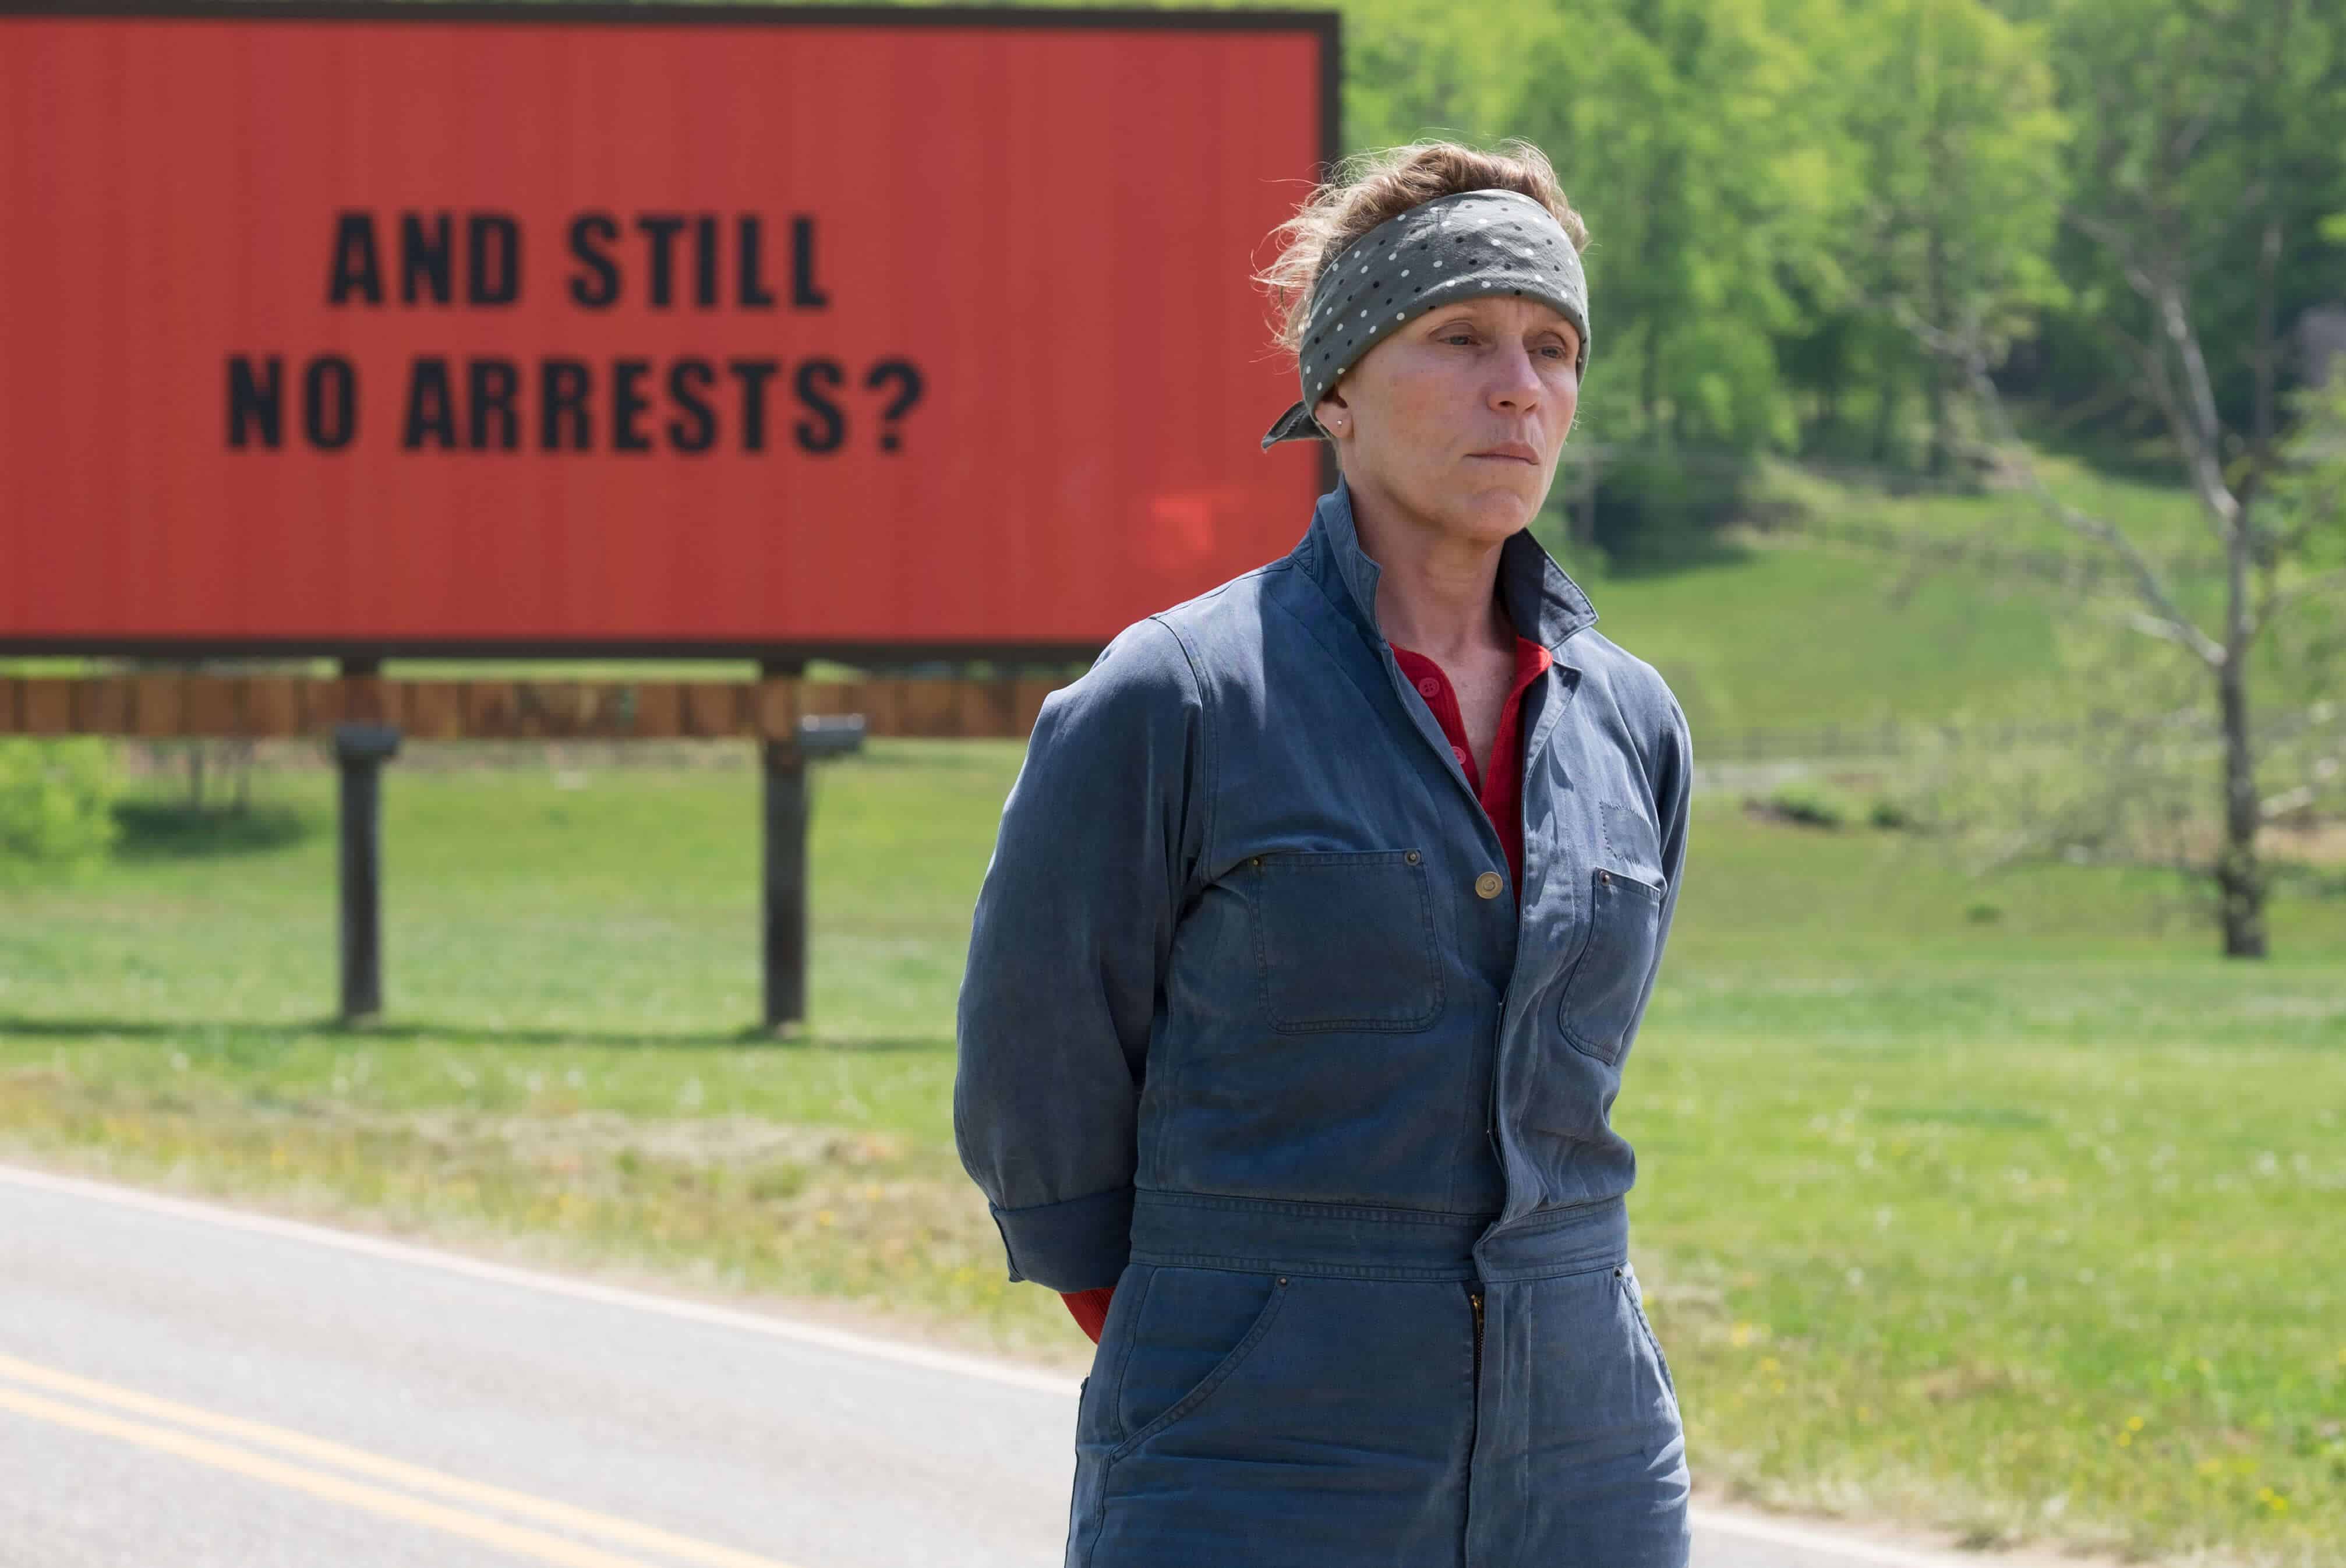 From the movie "Three billboards outside Ebbing, Missouri"